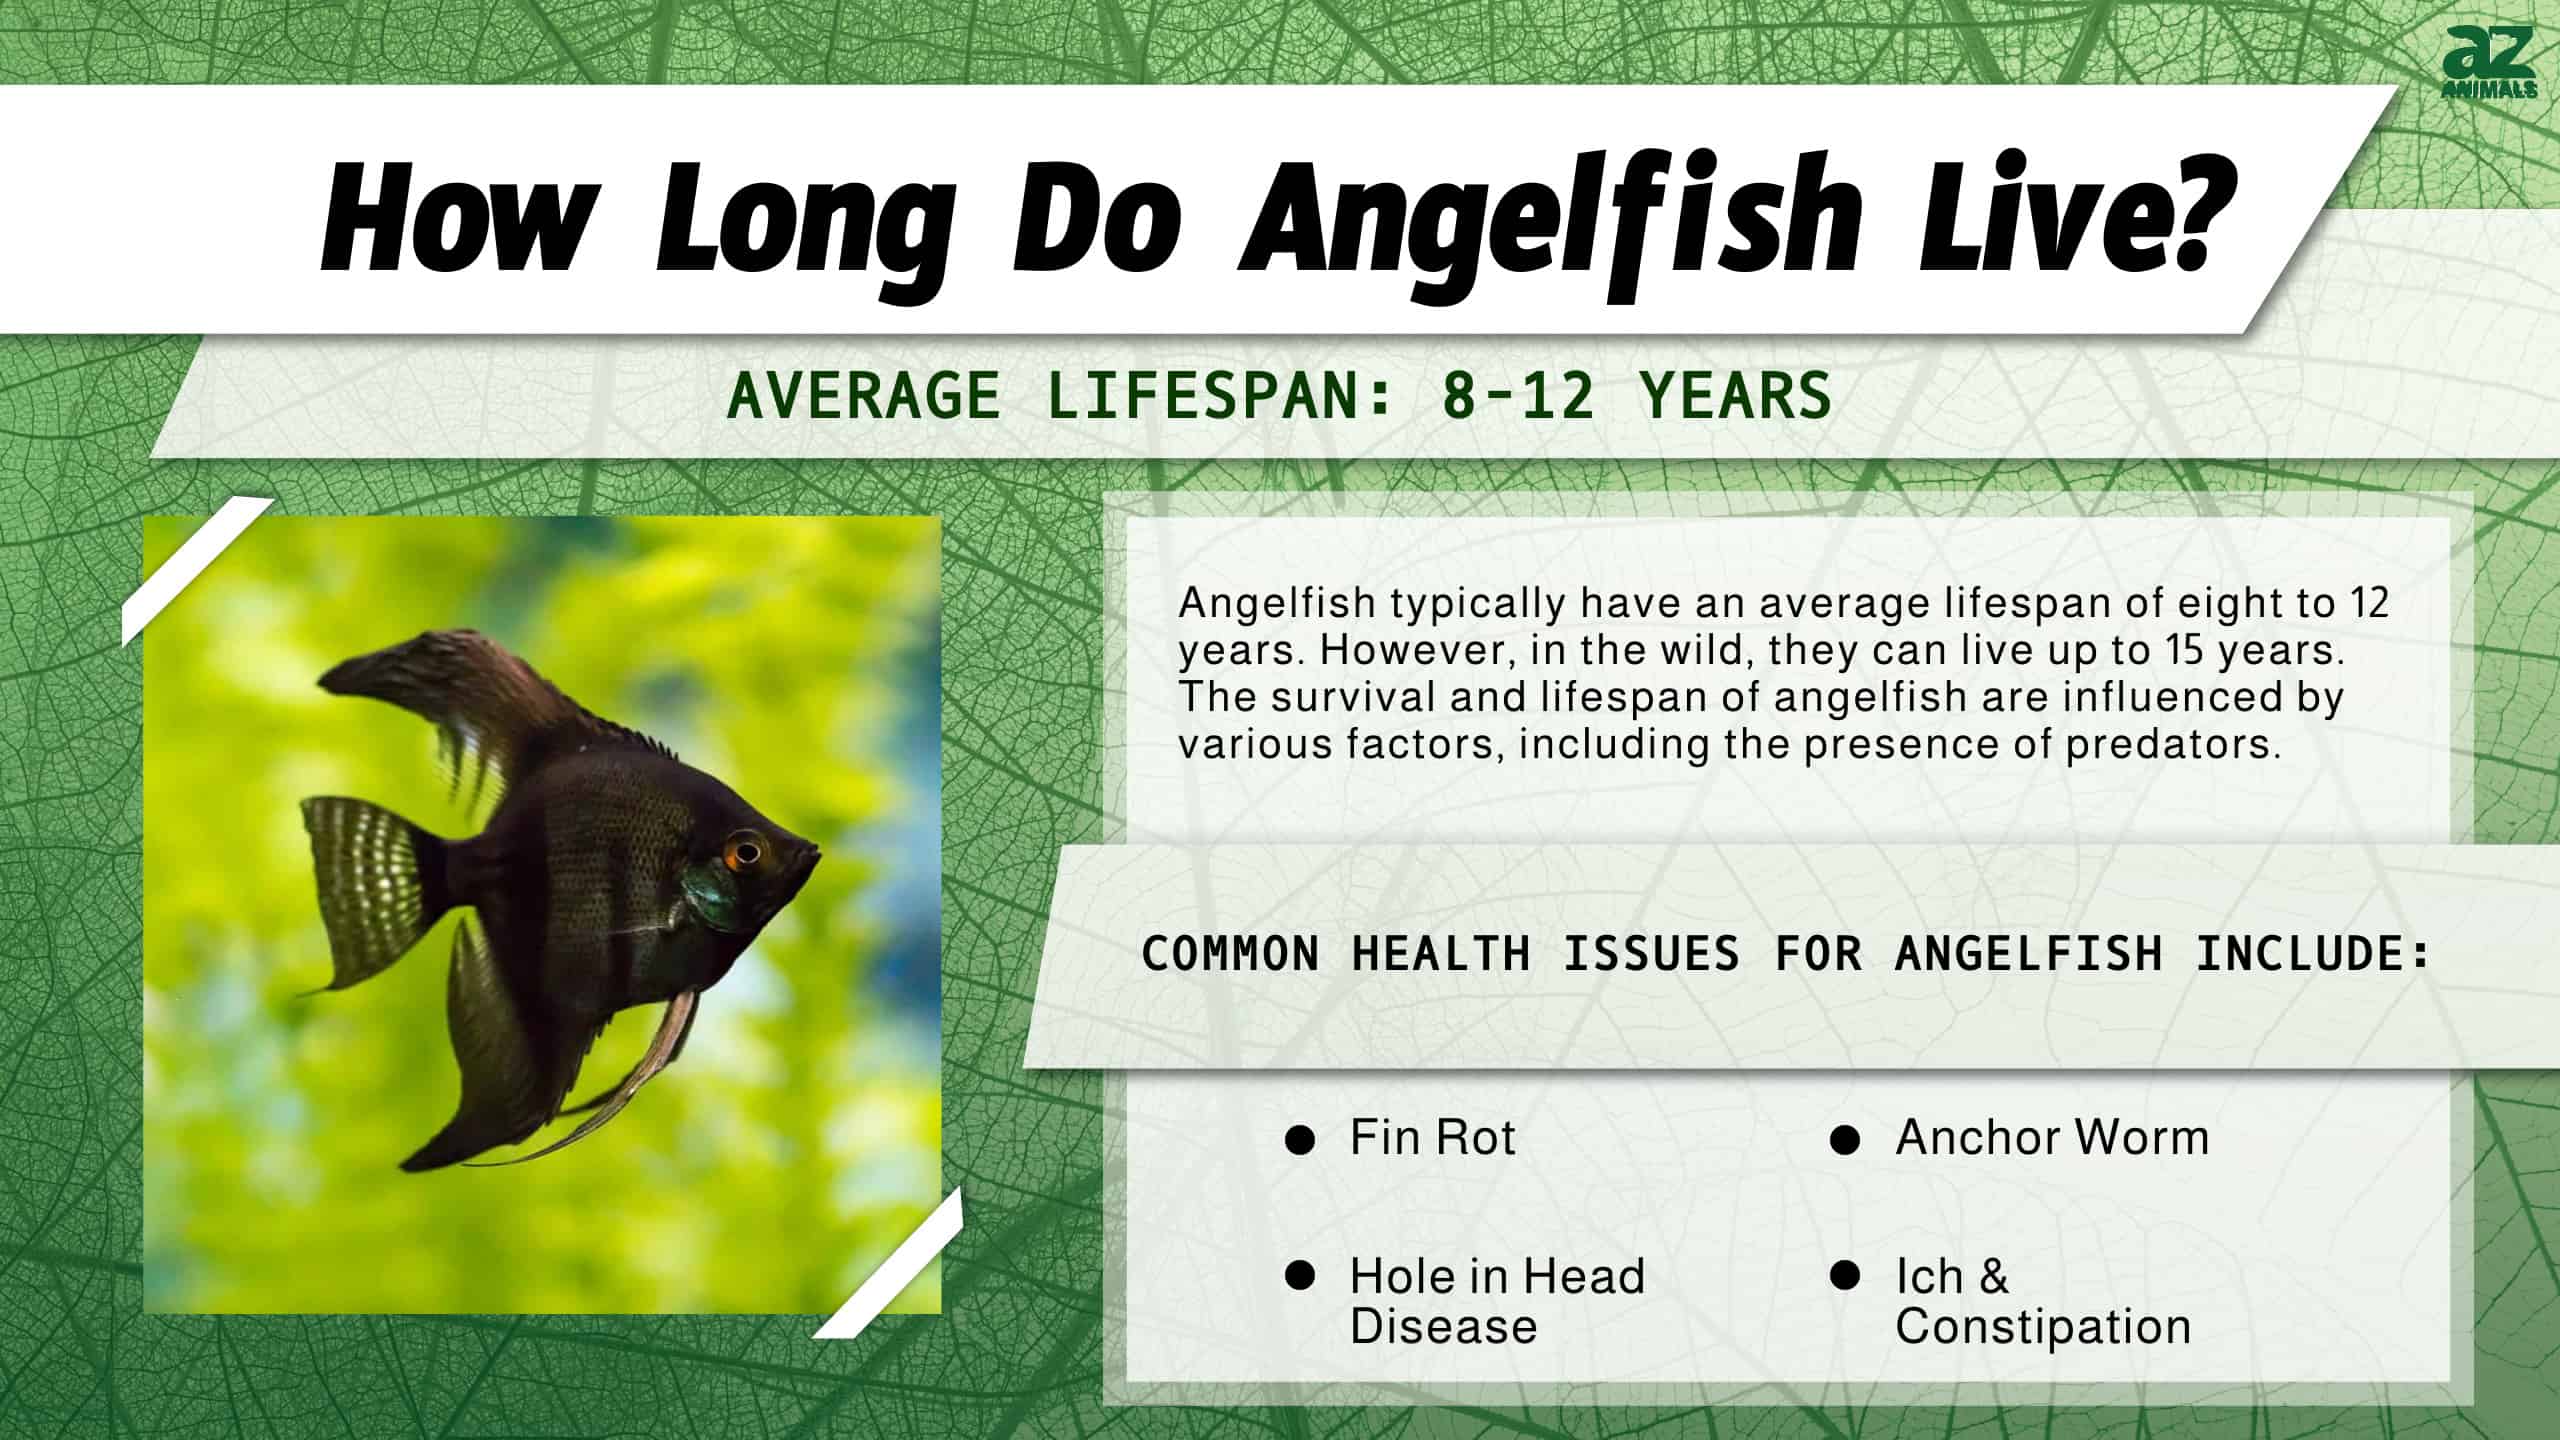 How Long Do Angelfish Live? infographic